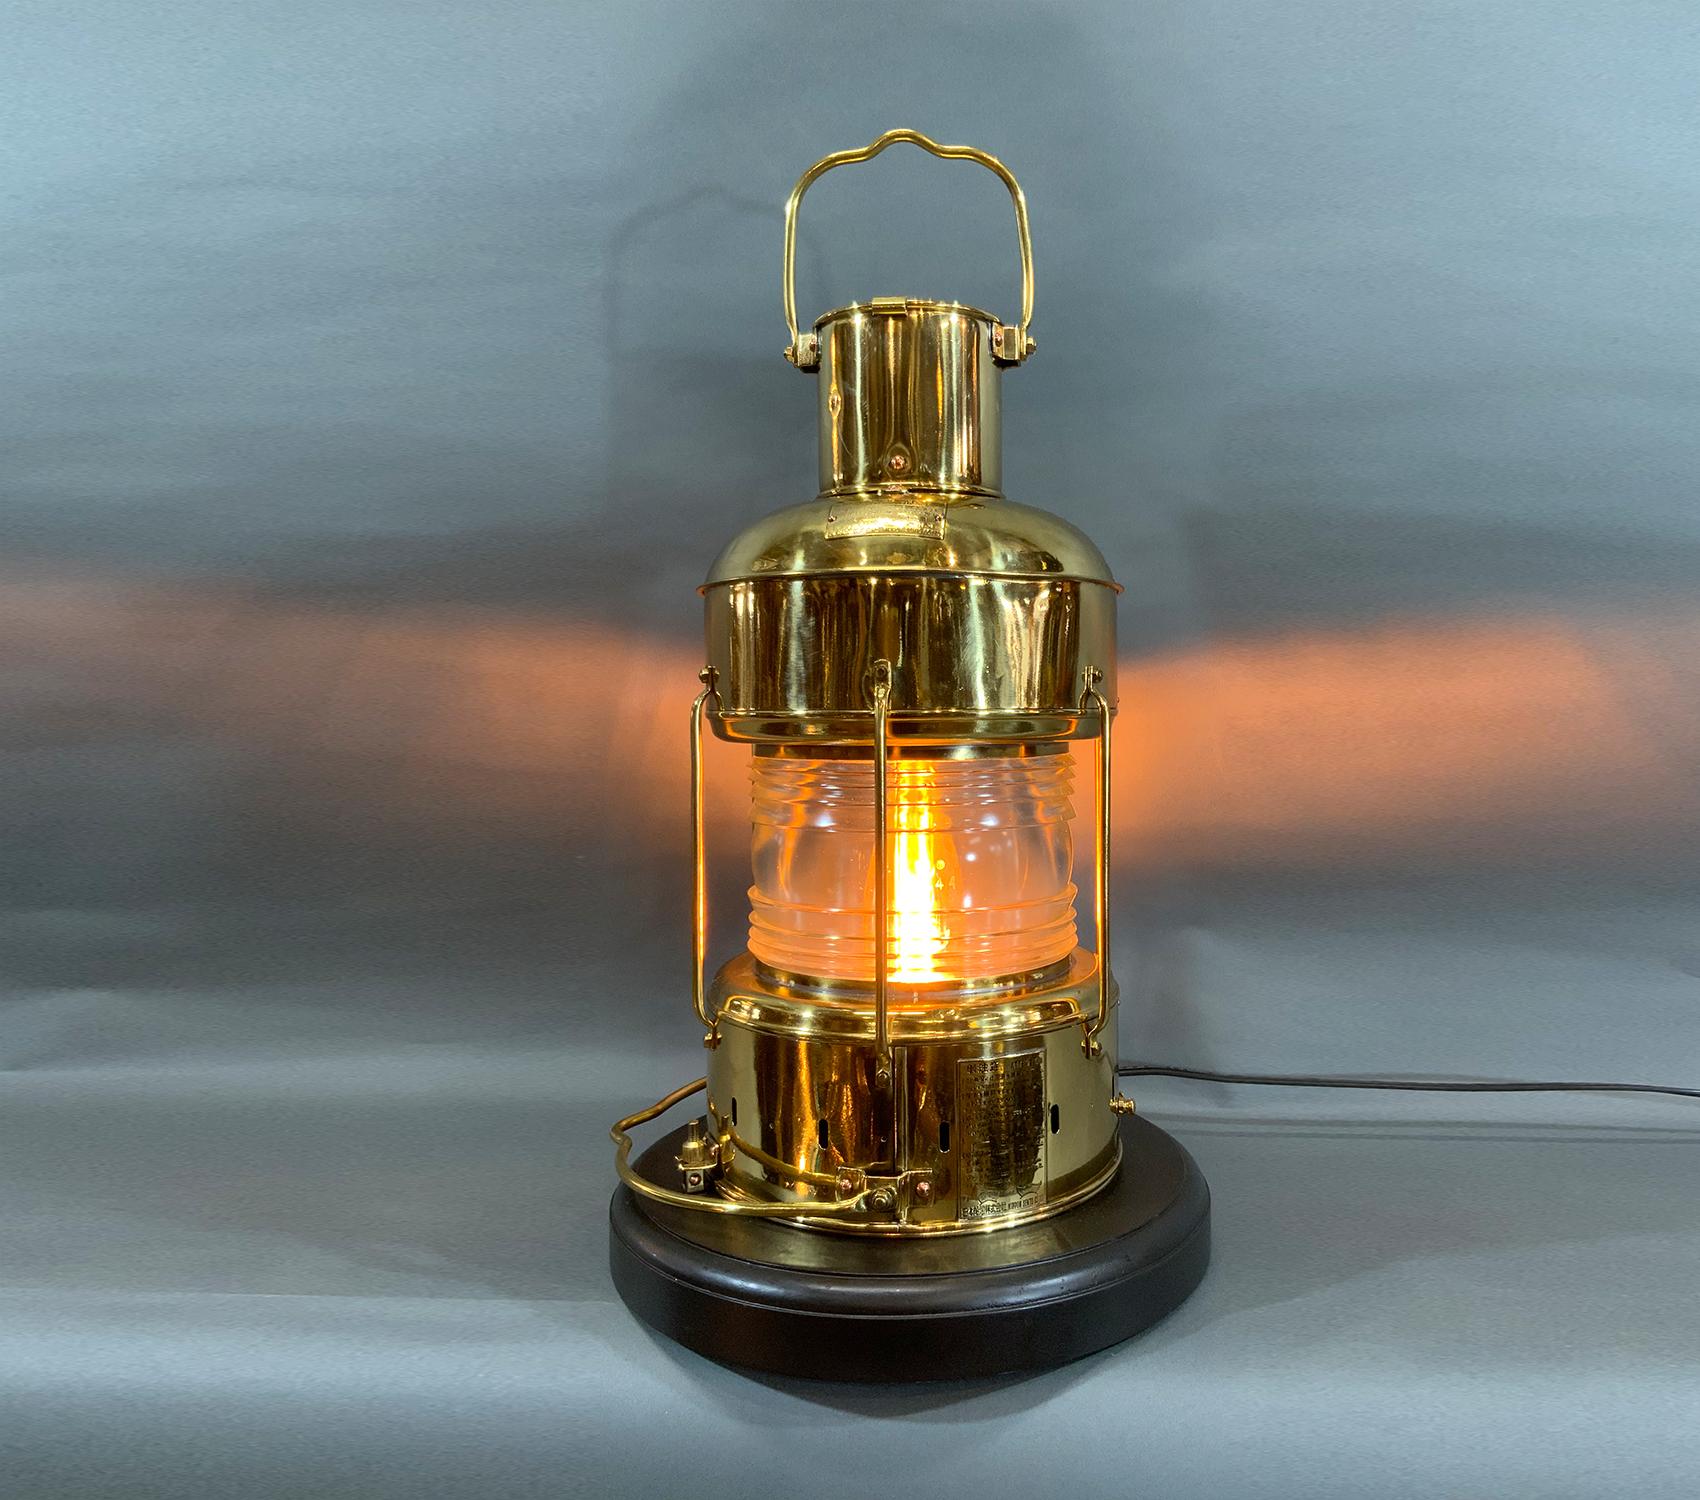 Meticulously polished and lacquered ship’s anchor lantern with Fresnel glass lens, protective bars, carry handles, etc. With Japanese maker’s tags. Circa 1970. Mounted to a thick mahogany base. Rewired for home use. 

Weight: 17 lbs
Overall